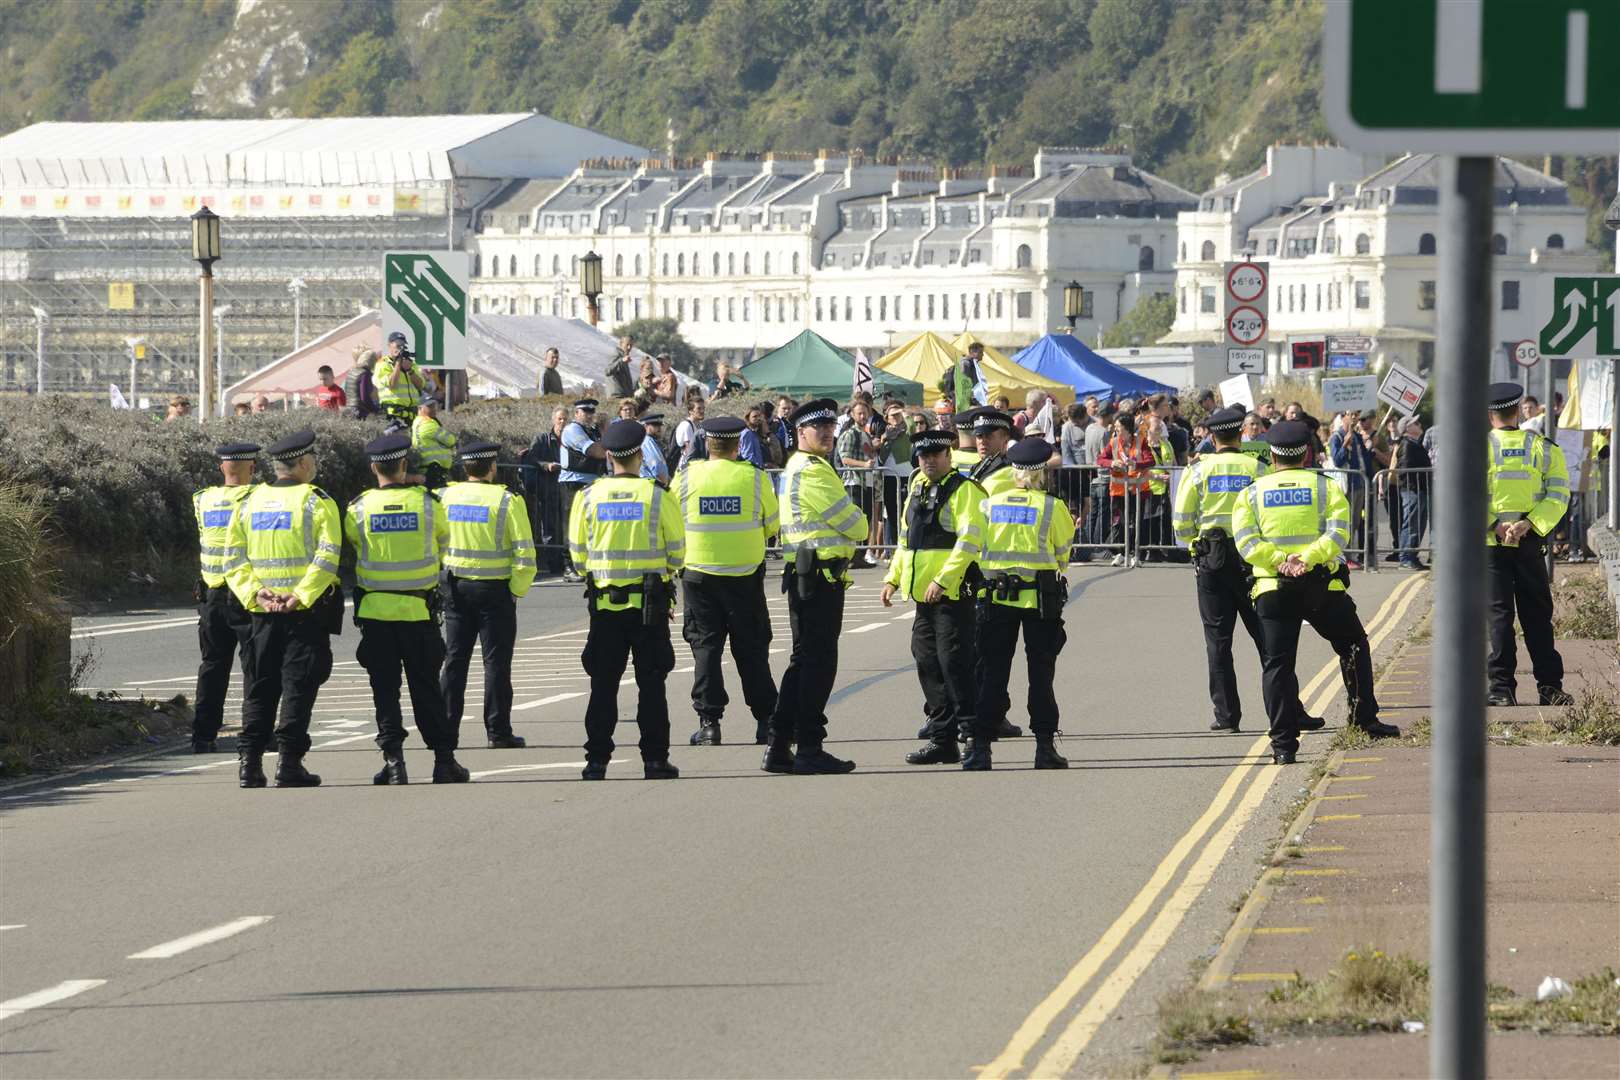 Dover Townwall street to Dover docks Extinction Rebellion protest.Police ready for any trouble.Picture: Paul Amos. (17136673)